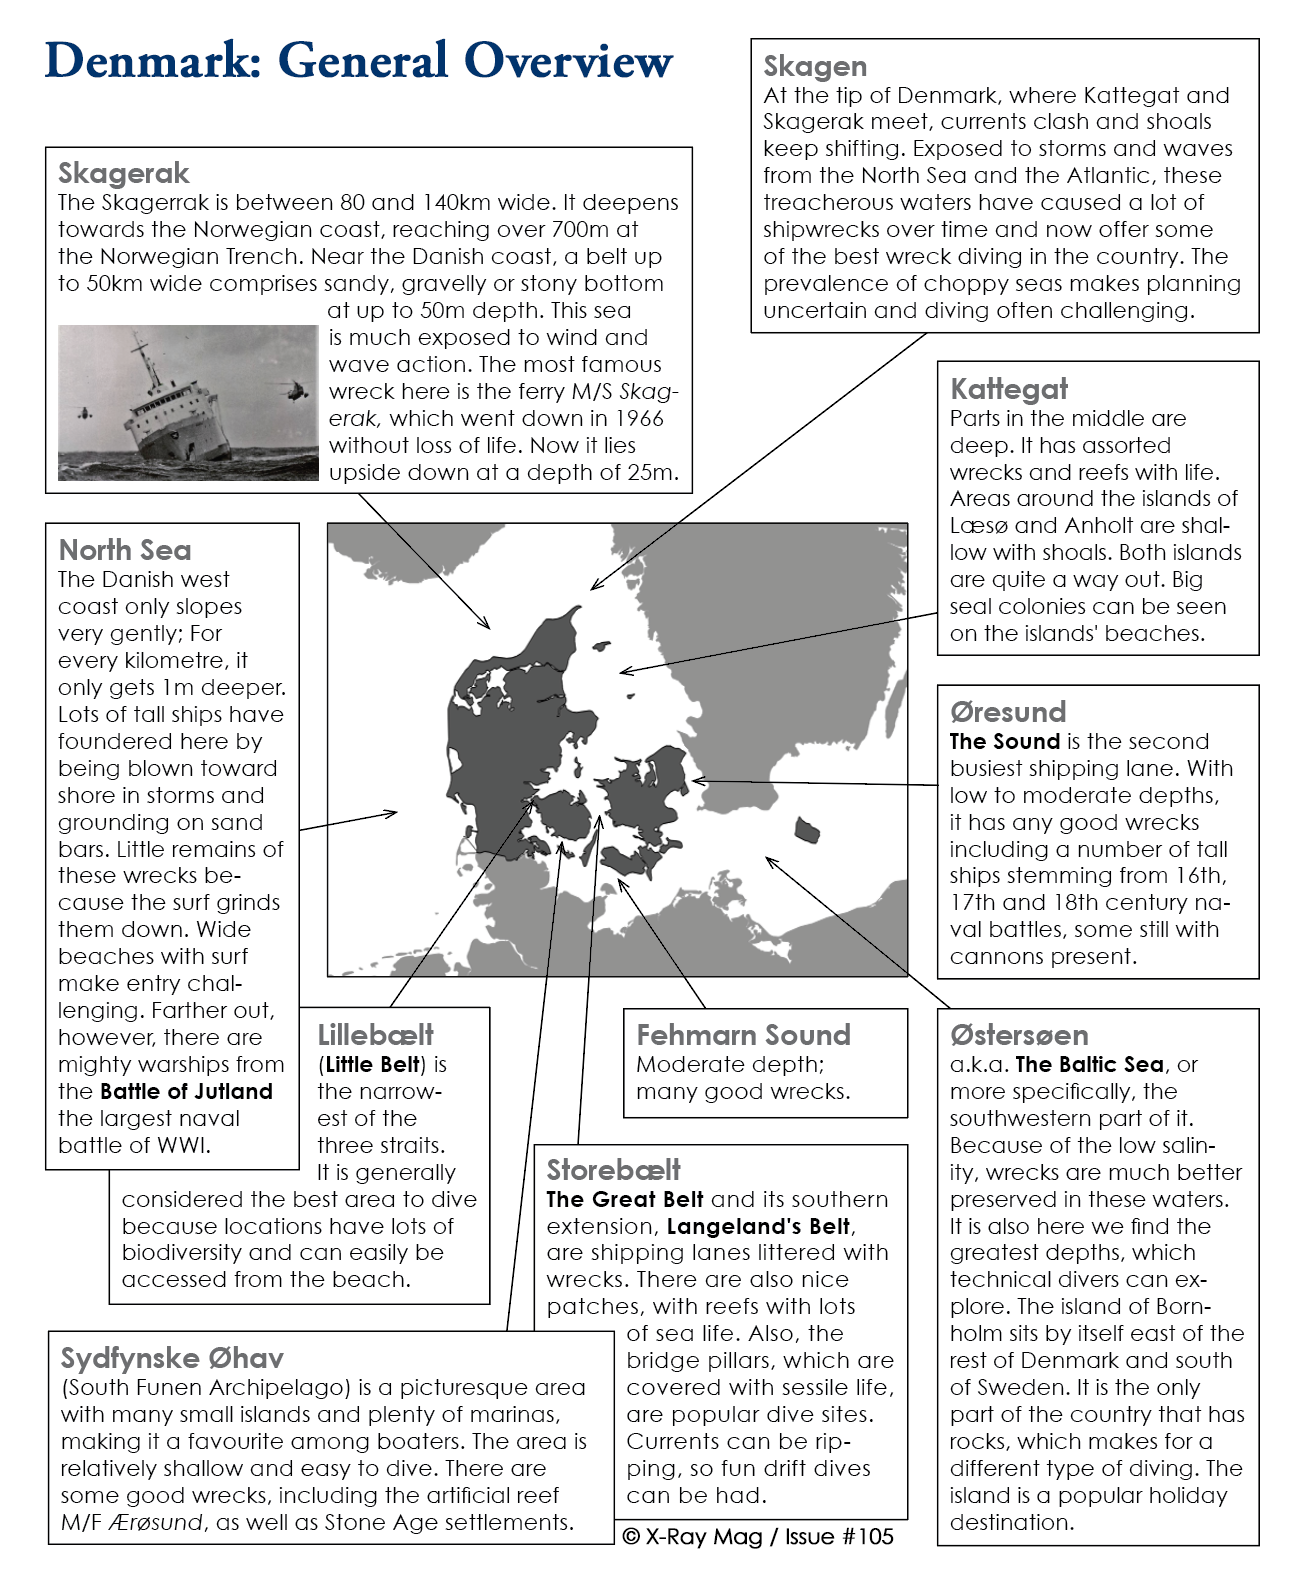 Denmark overview. © X-Ray Mag